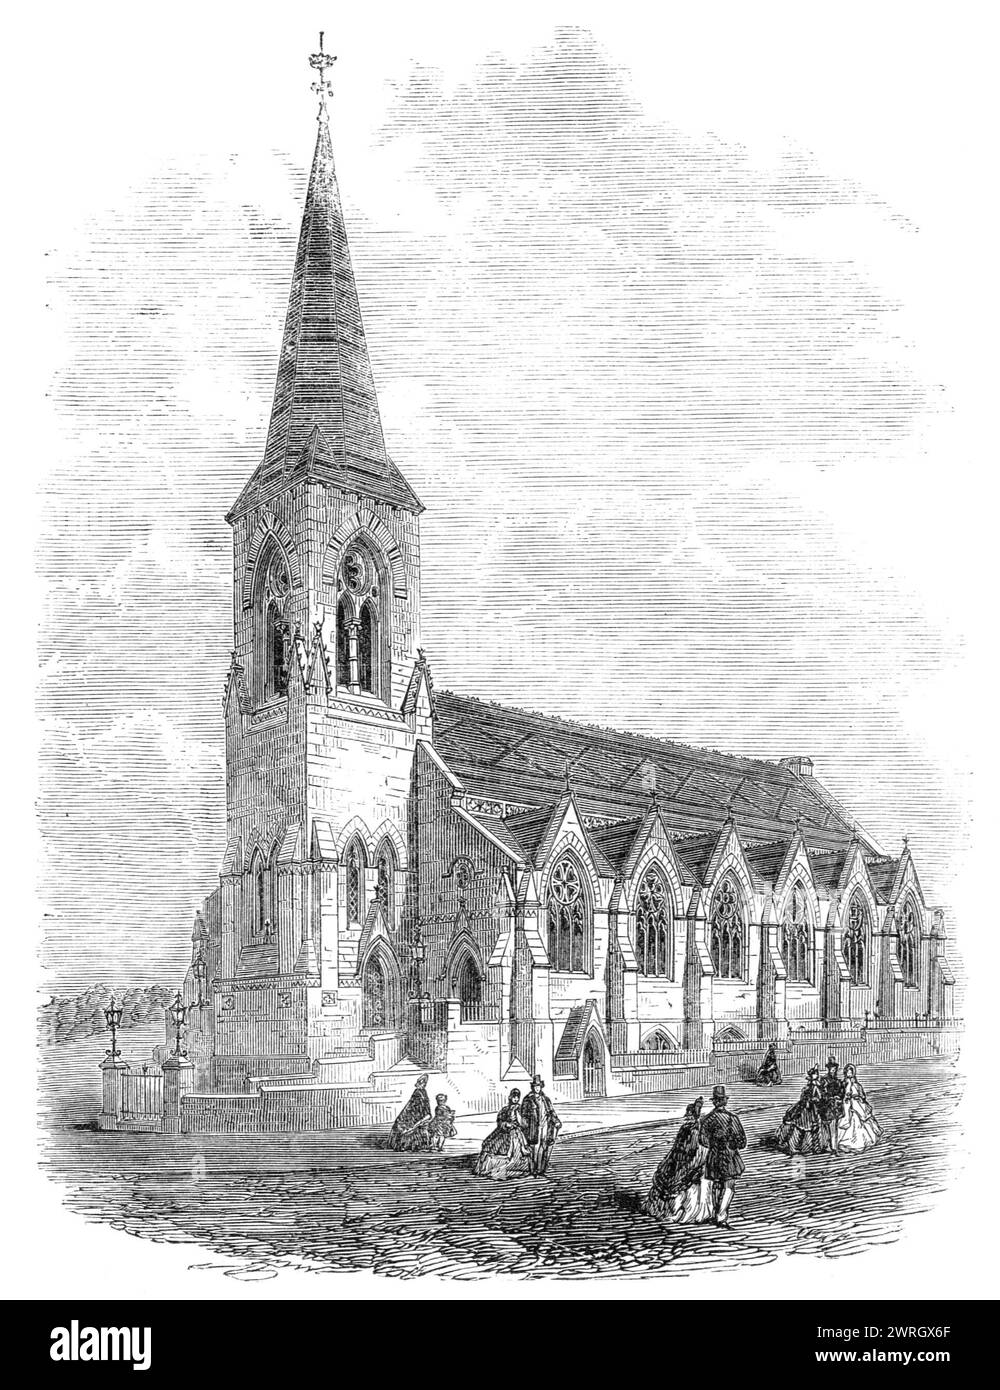 New congregational church at St. Leonards-on-Sea, 1864. 'The new Congregational Church at St. Leonards is a large building in the Early Gothic style...The exterior is adorned with a fine row of large Gothic traceried windows of different patterns, with gablets over each; and the roofs are covered with slates laid in patterns and bands of different colours. At the principal front is a lofty tower and slated spire. This is so placed as to be a very prominent feature from the principal road, and it is a very conspicuous object in the landscape, being visible from a considerable distance. The belf Stock Photo